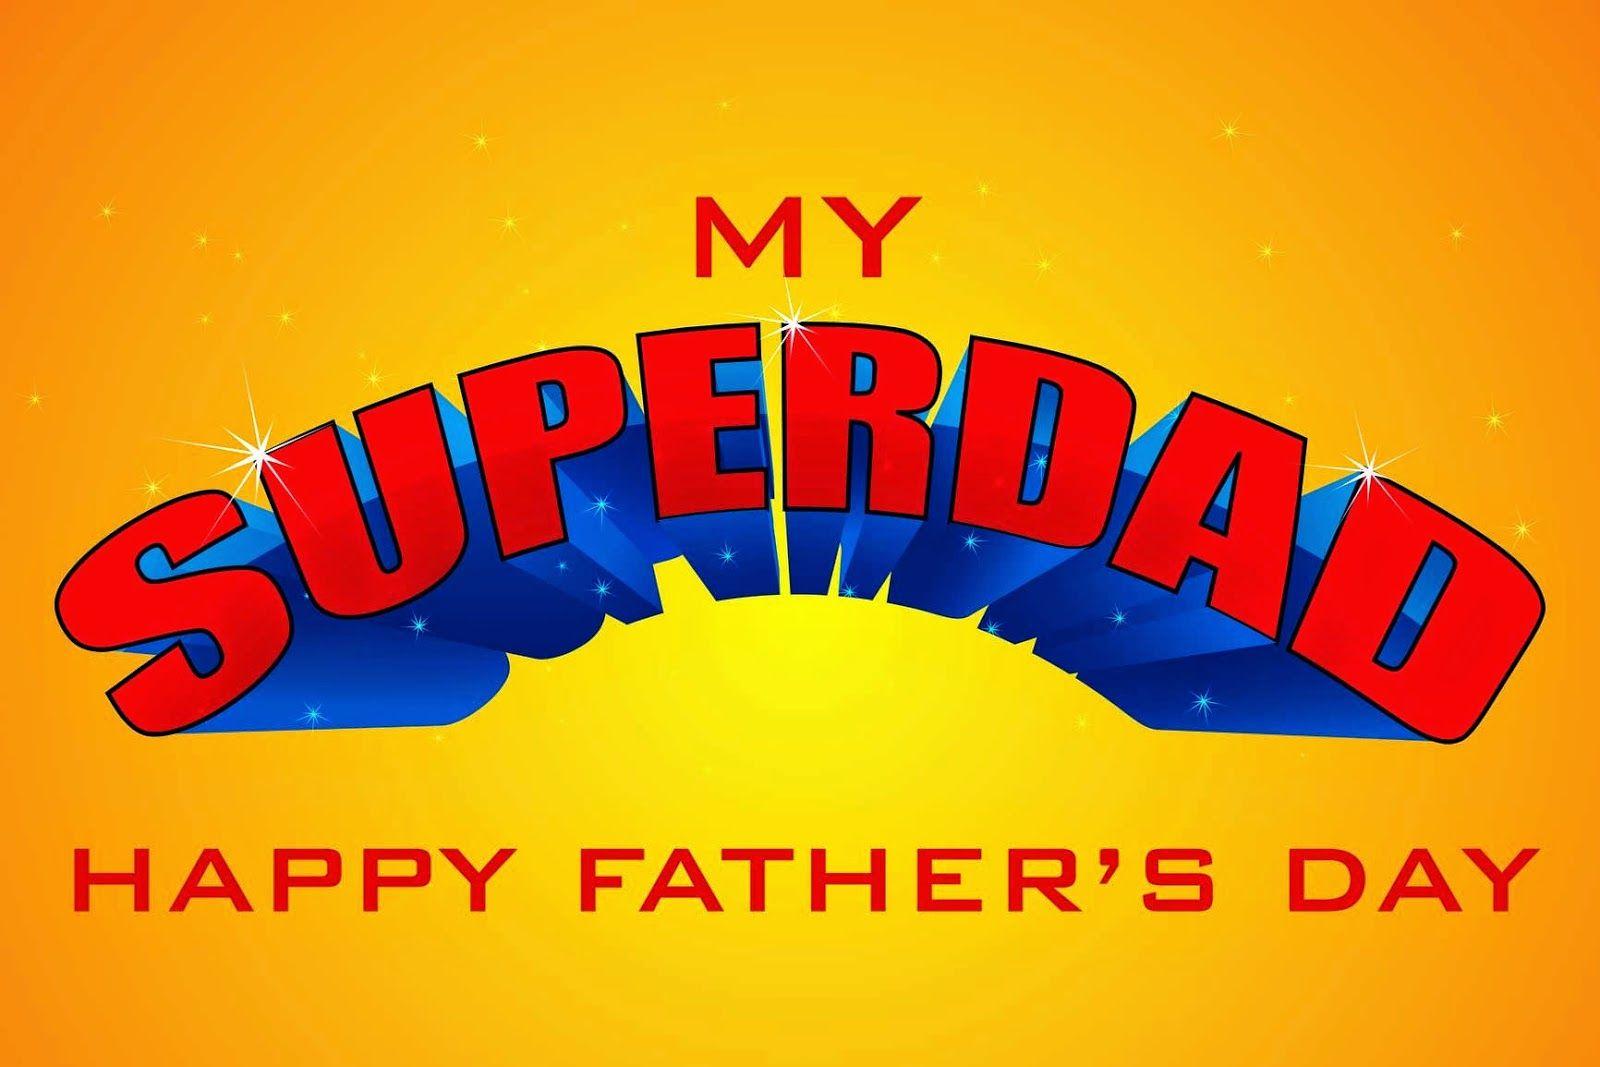 Happy Fathers Day 2018 Image, Wallpaper, Picture, Photo, Pics